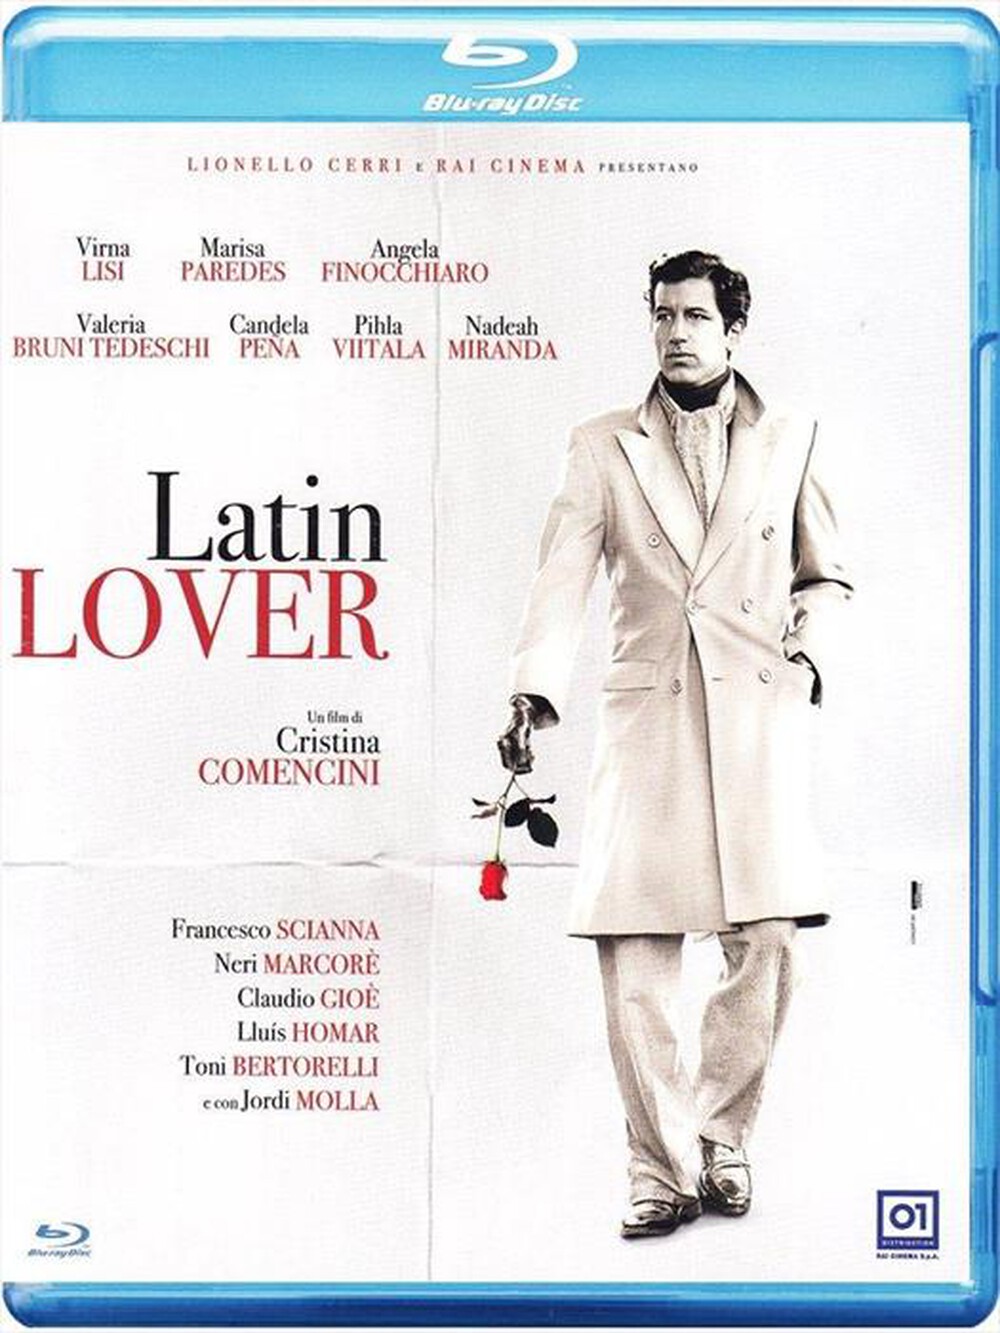 "EAGLE PICTURES - Latin Lover"